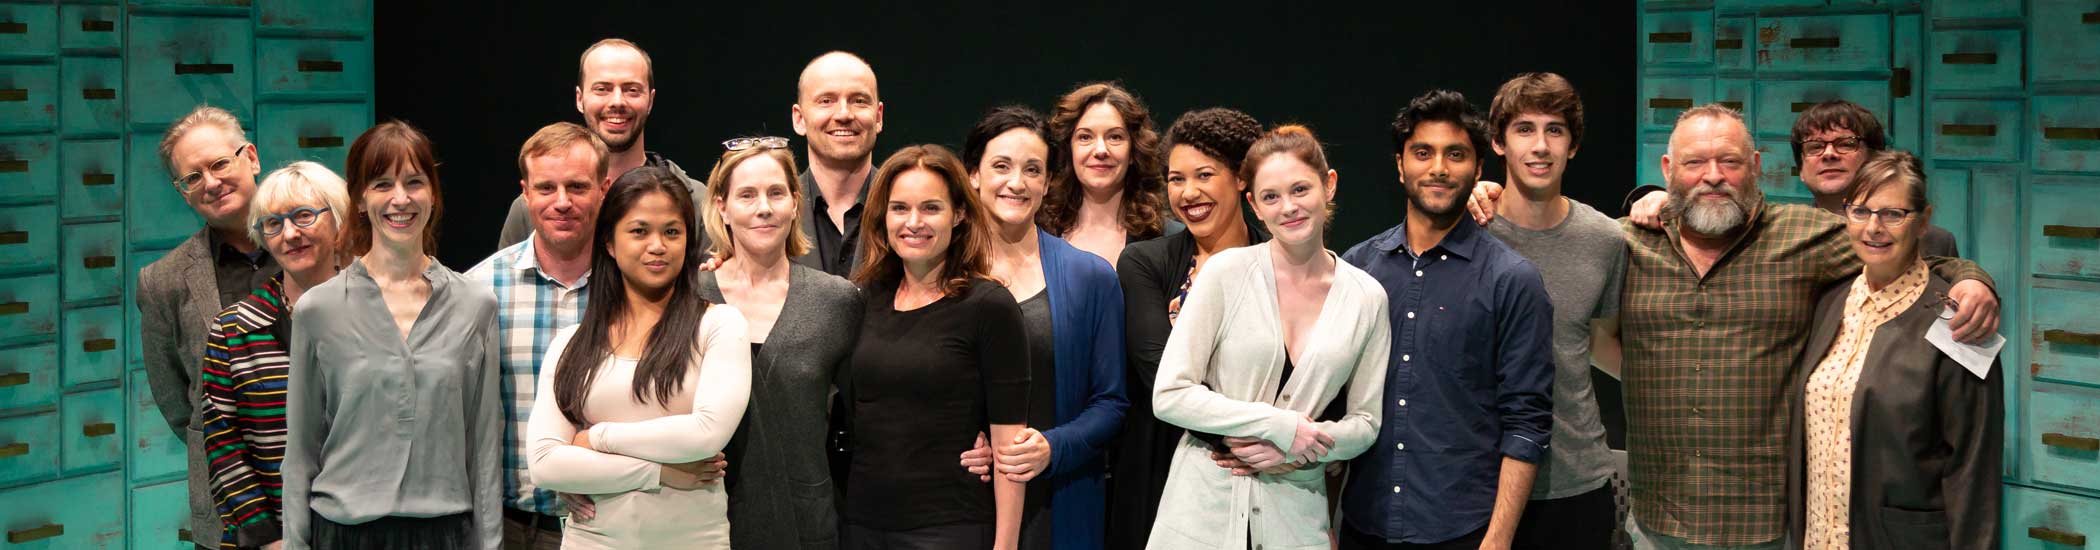 Group photo of smiling actors onstage in casual clothing.